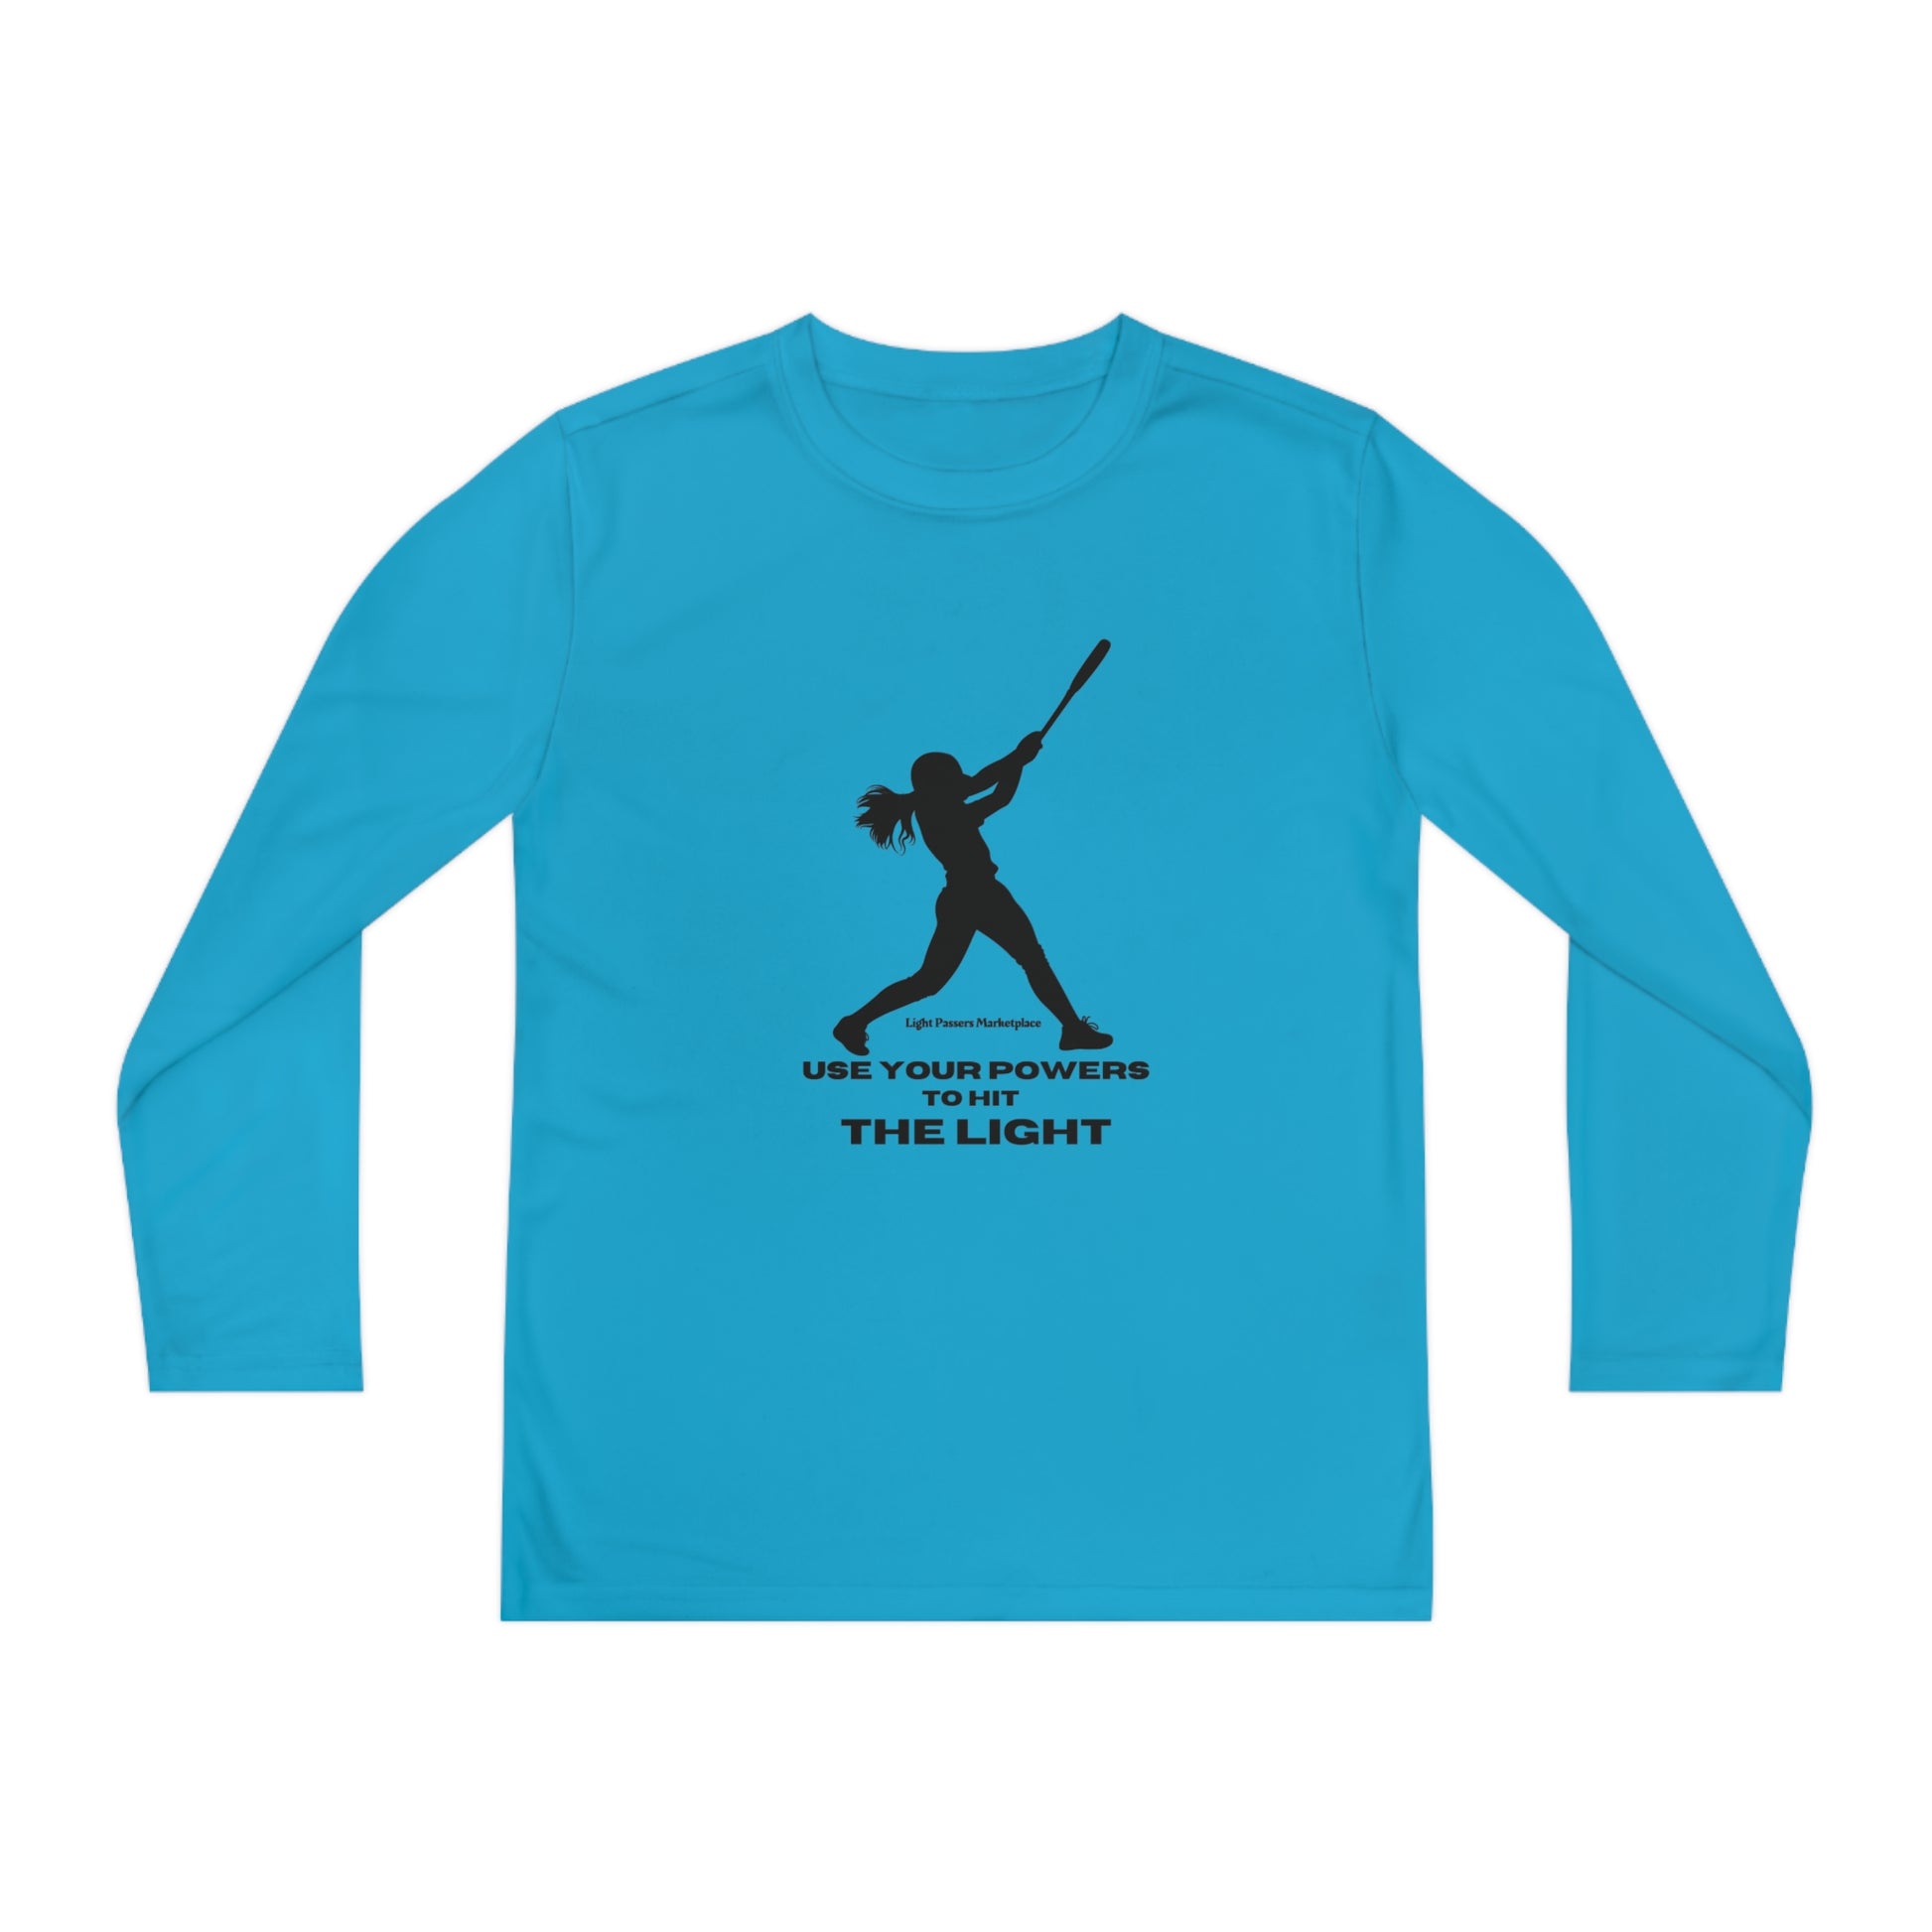 Youth long sleeve blue shirt with a girl swinging a bat silhouette, ideal for active kids. Made of 100% moisture-wicking polyester, lightweight, and breathable for comfort during sports.